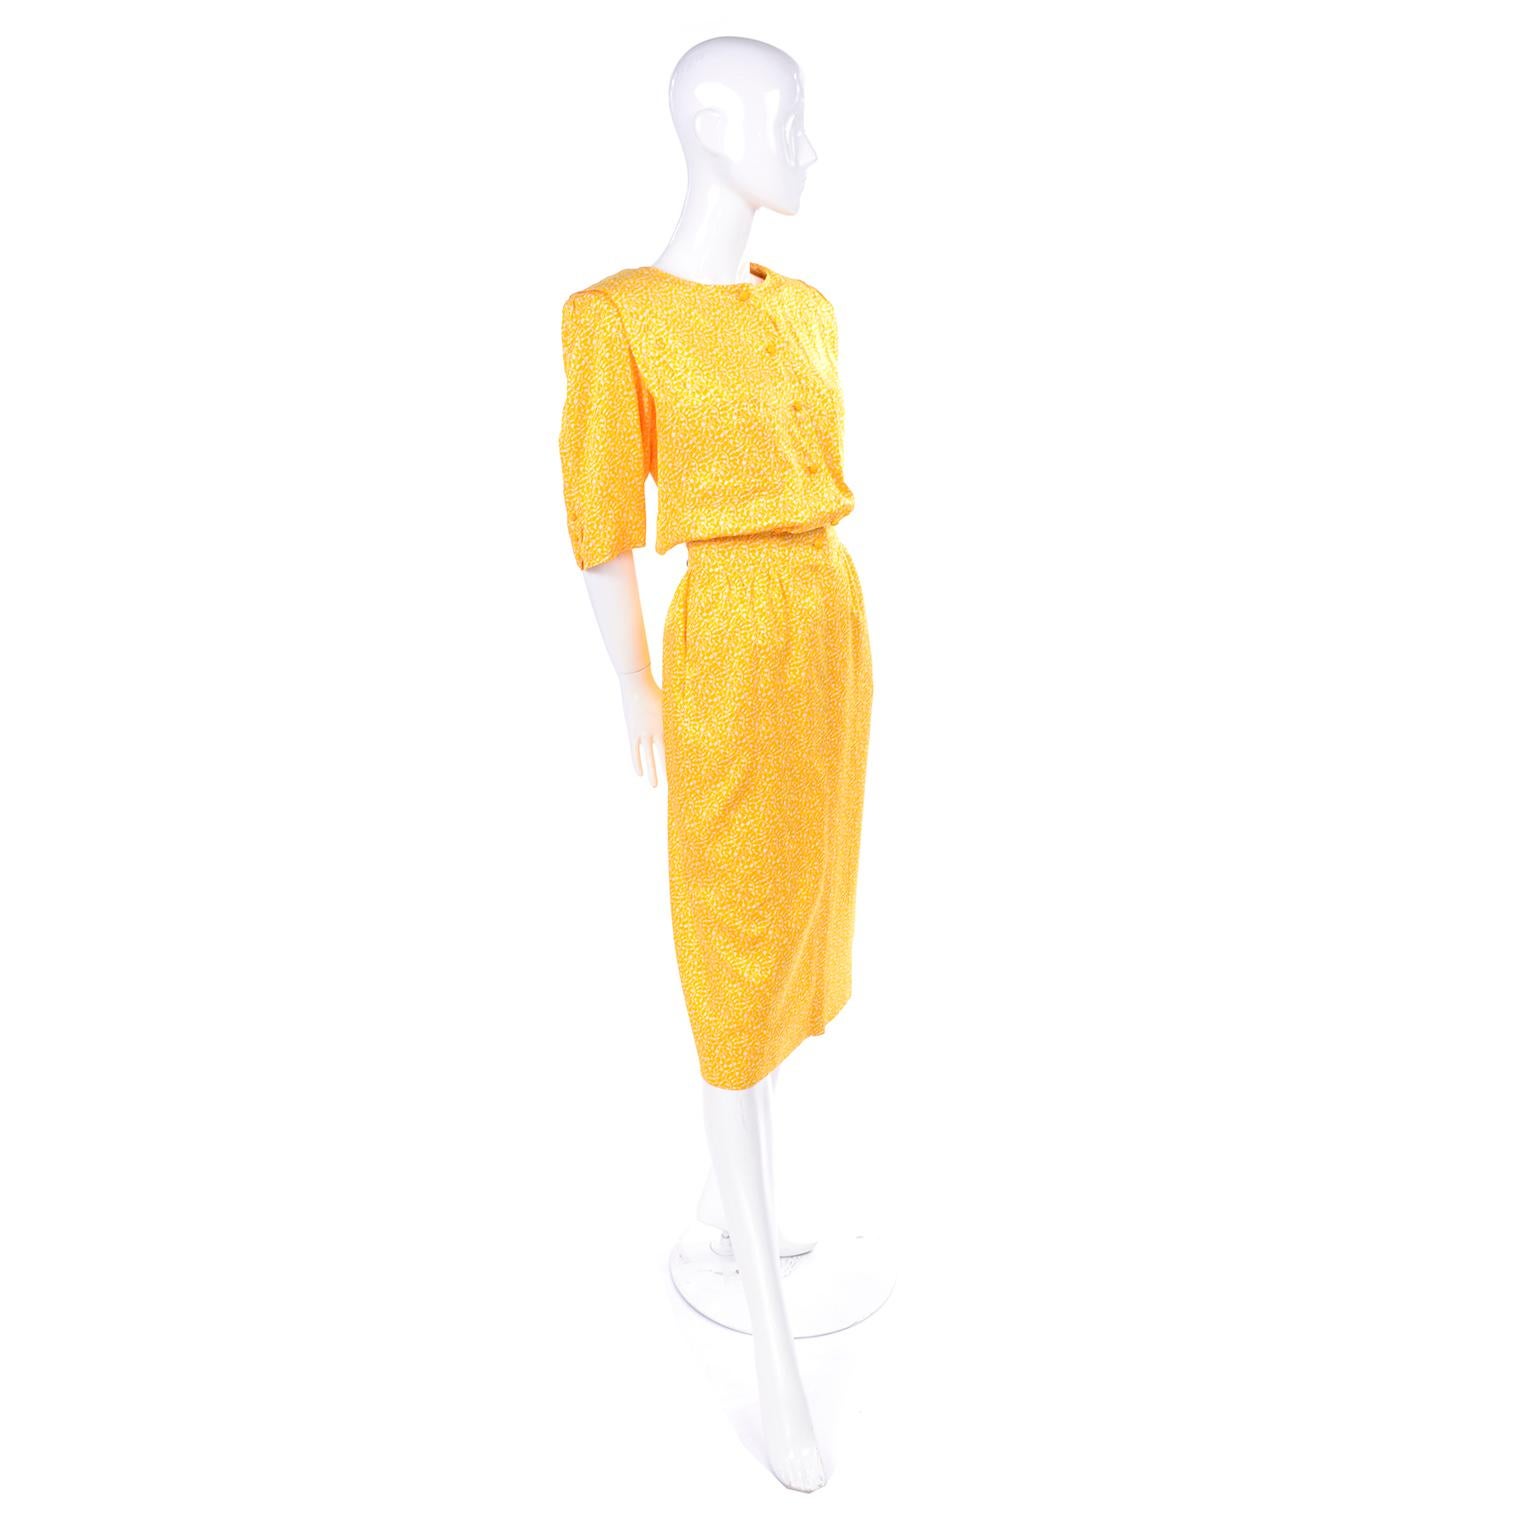 This is a very pretty yellow and white rayon dress from Ungaro.  The dress has the Emanuel Ungaro Parallele Paris label, two breast pockets and two side slit hip pockets. It has shoulder pads with pleats over the shoulders. The sleeves hit just